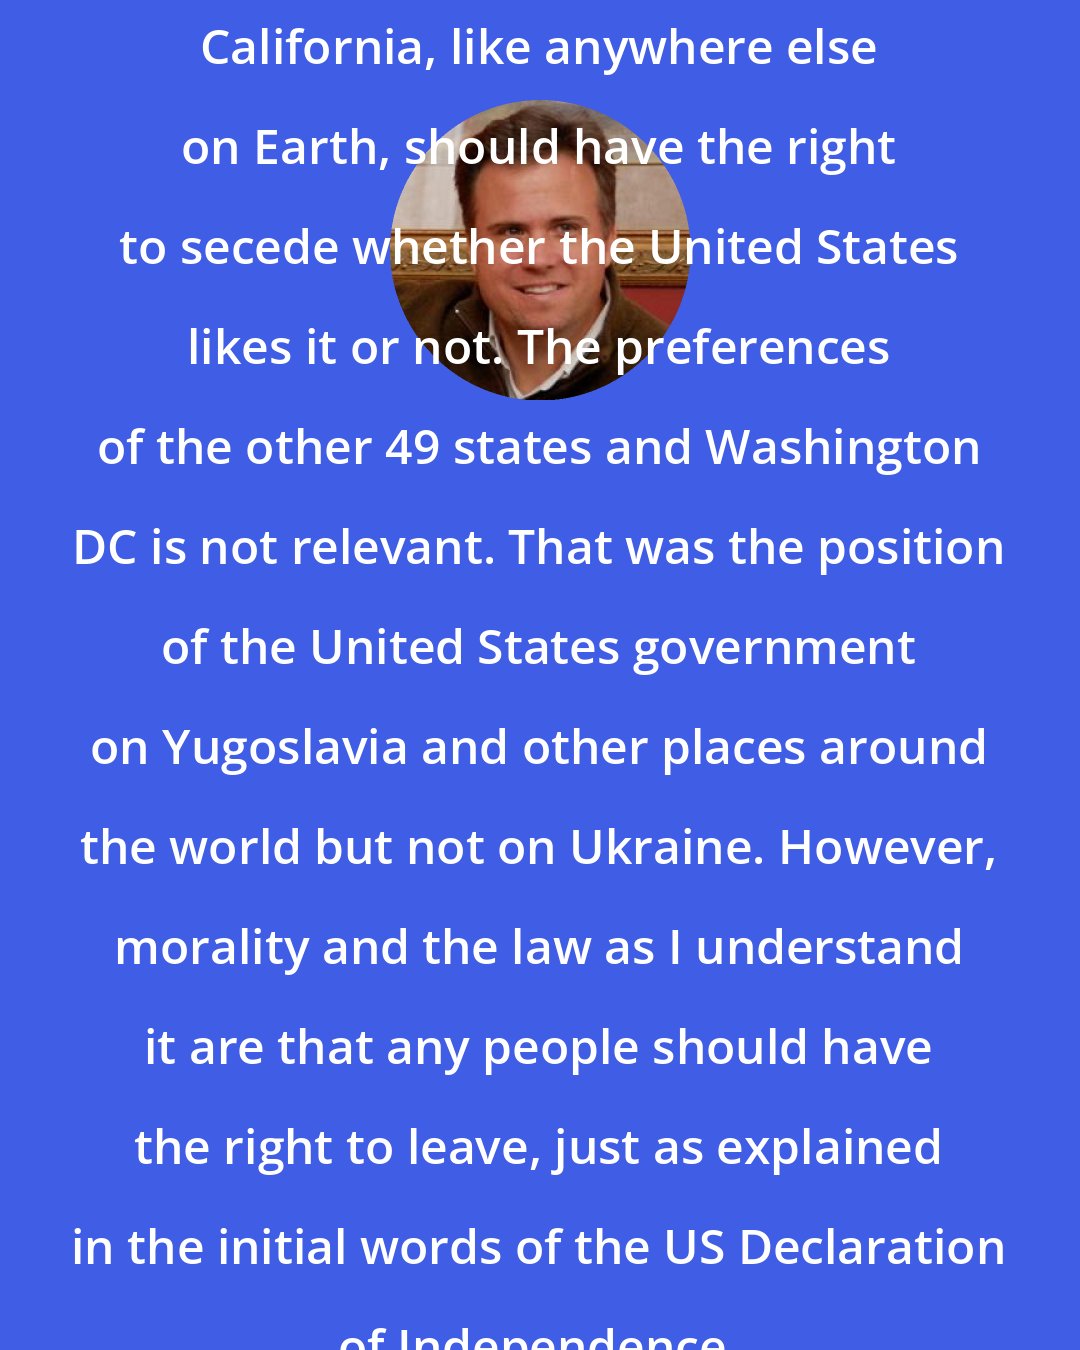 David Swanson: California, like anywhere else on Earth, should have the right to secede whether the United States likes it or not. The preferences of the other 49 states and Washington DC is not relevant. That was the position of the United States government on Yugoslavia and other places around the world but not on Ukraine. However, morality and the law as I understand it are that any people should have the right to leave, just as explained in the initial words of the US Declaration of Independence.